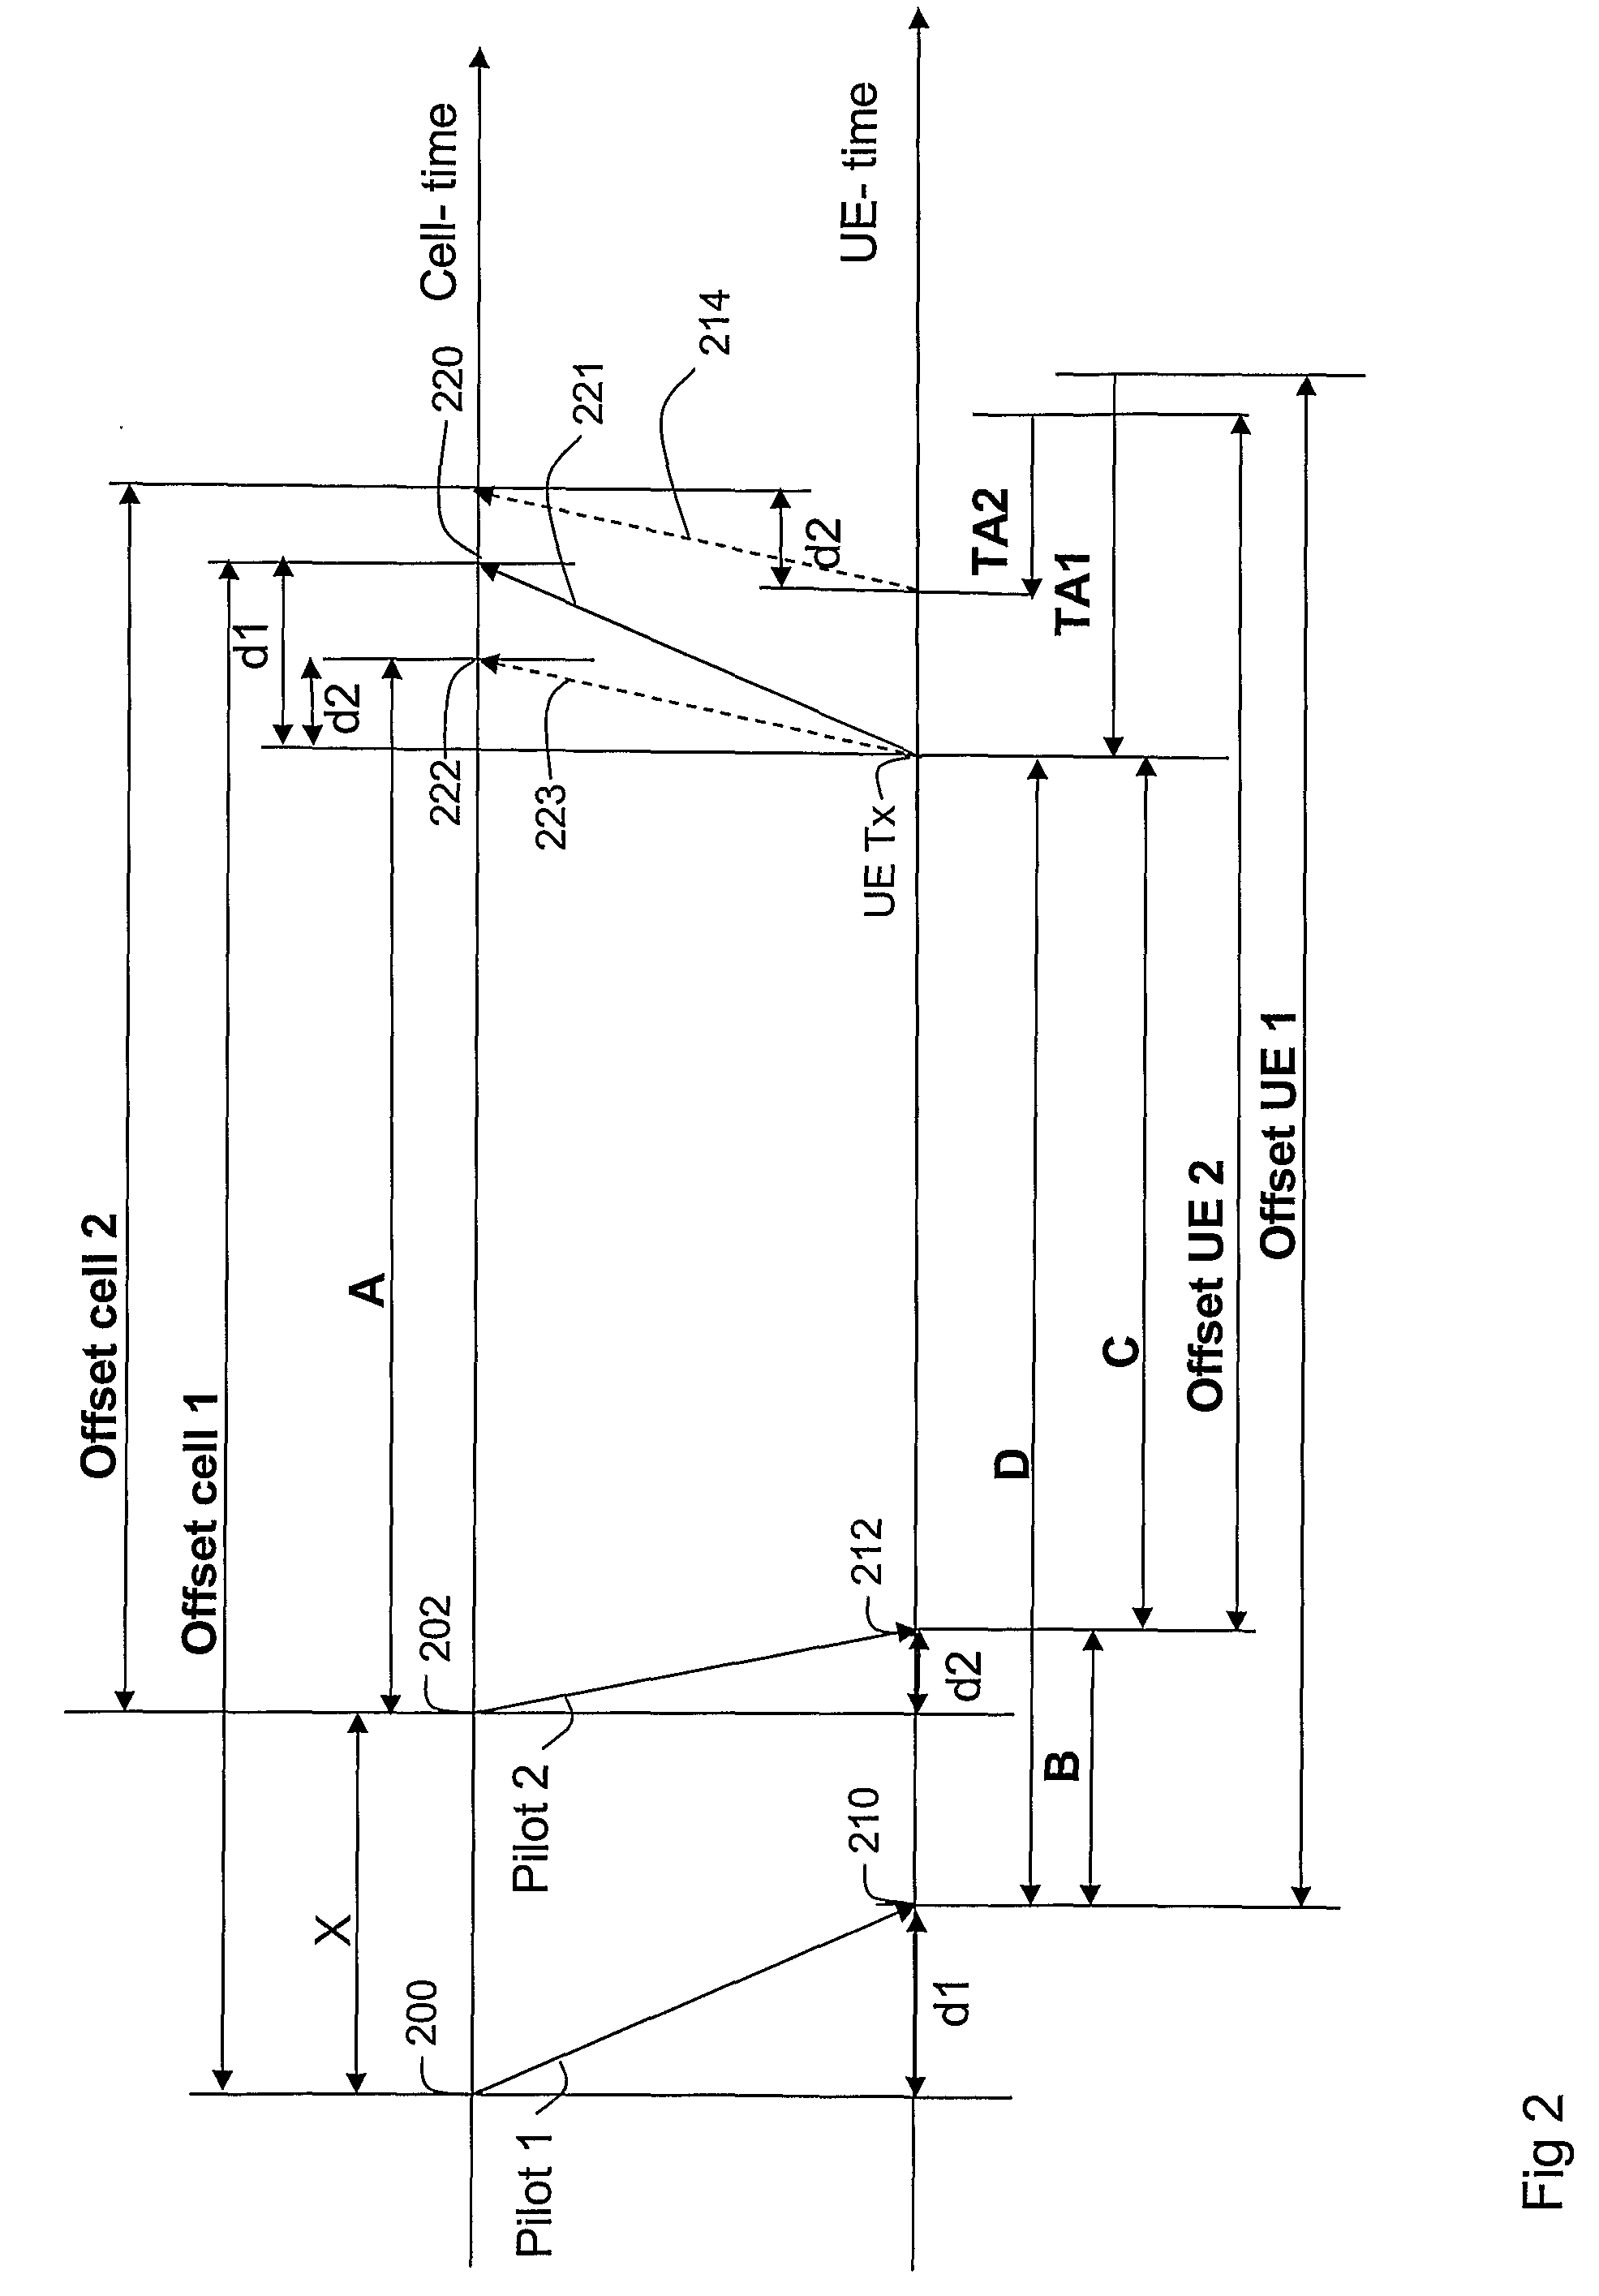 Calculation of a destination time alignment value to be used by a user equipment in a destination cell after a handover